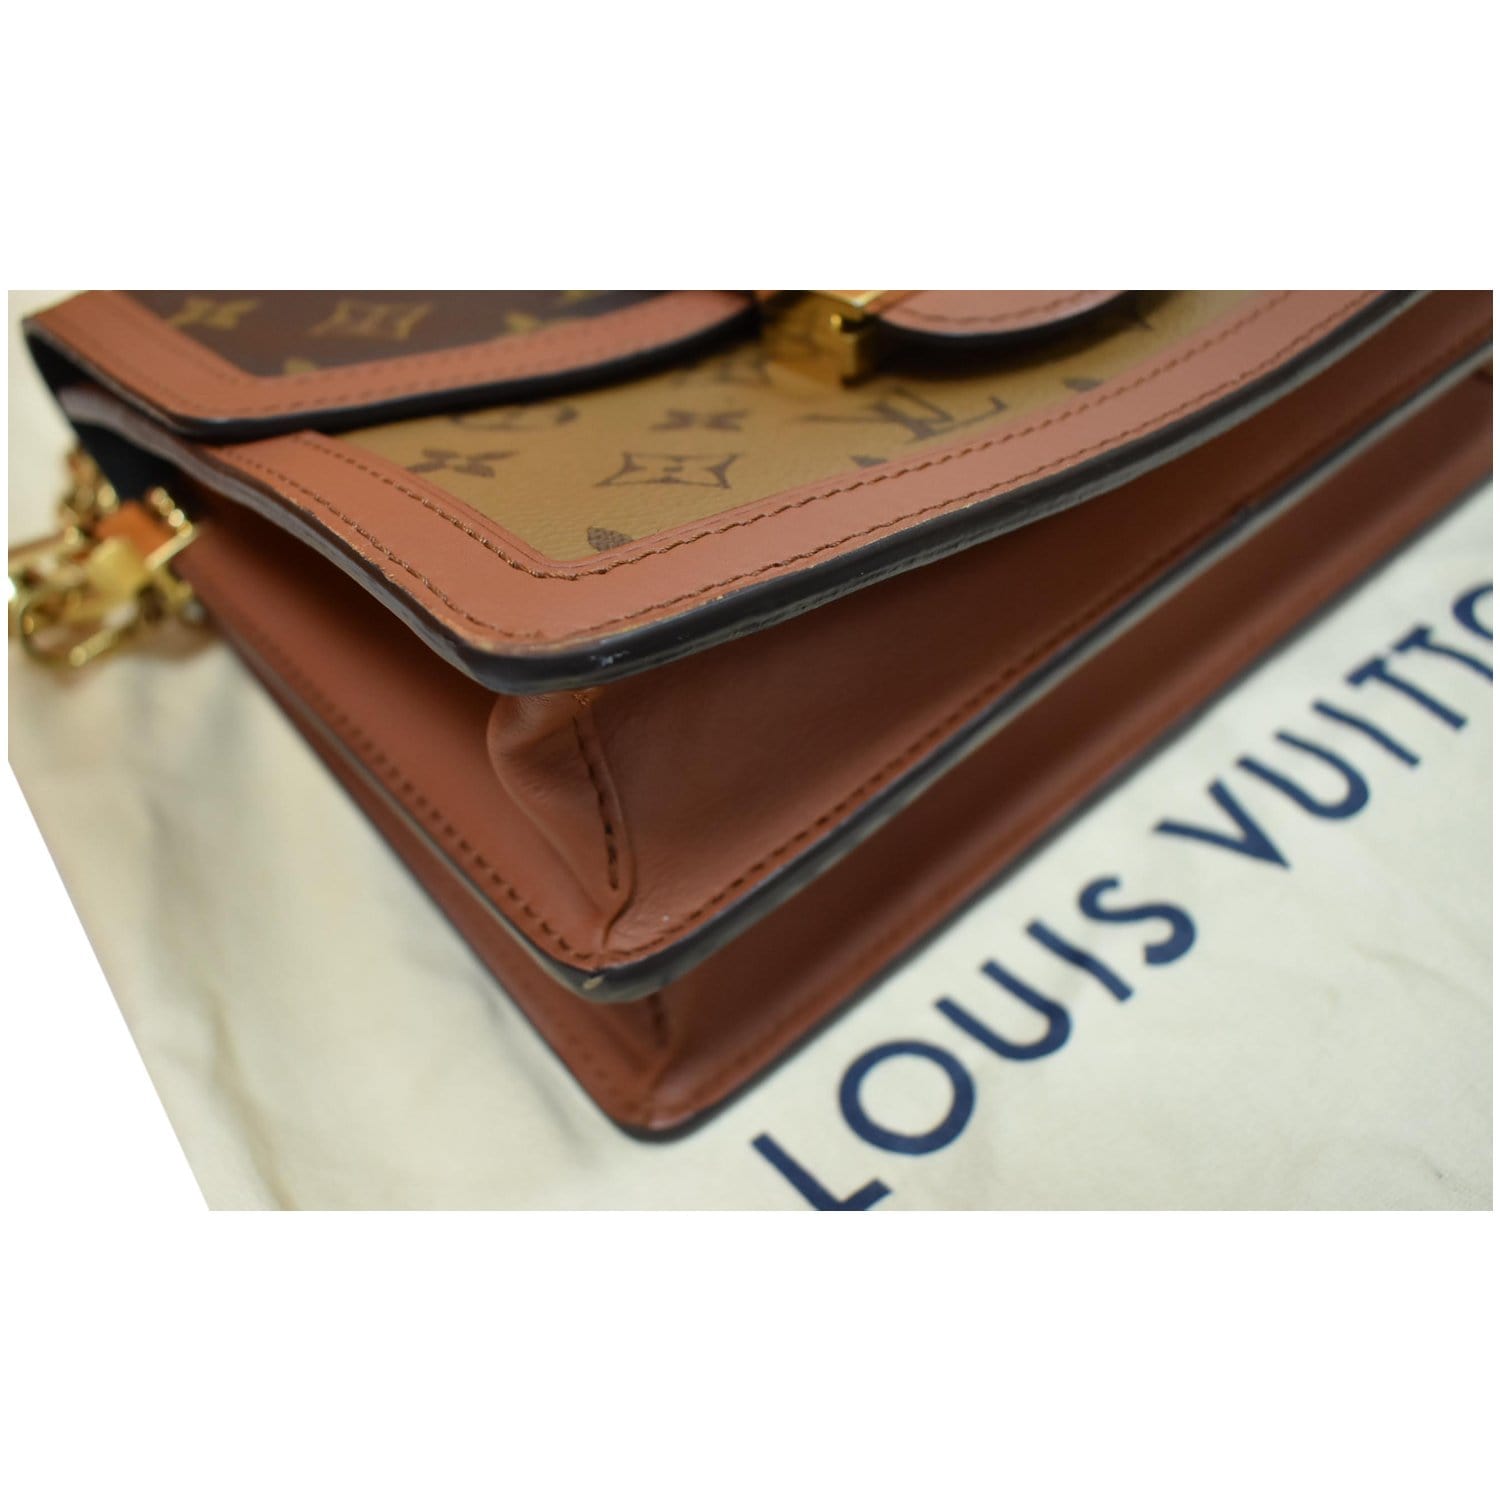 Products By Louis Vuitton : Pochette Dauphine